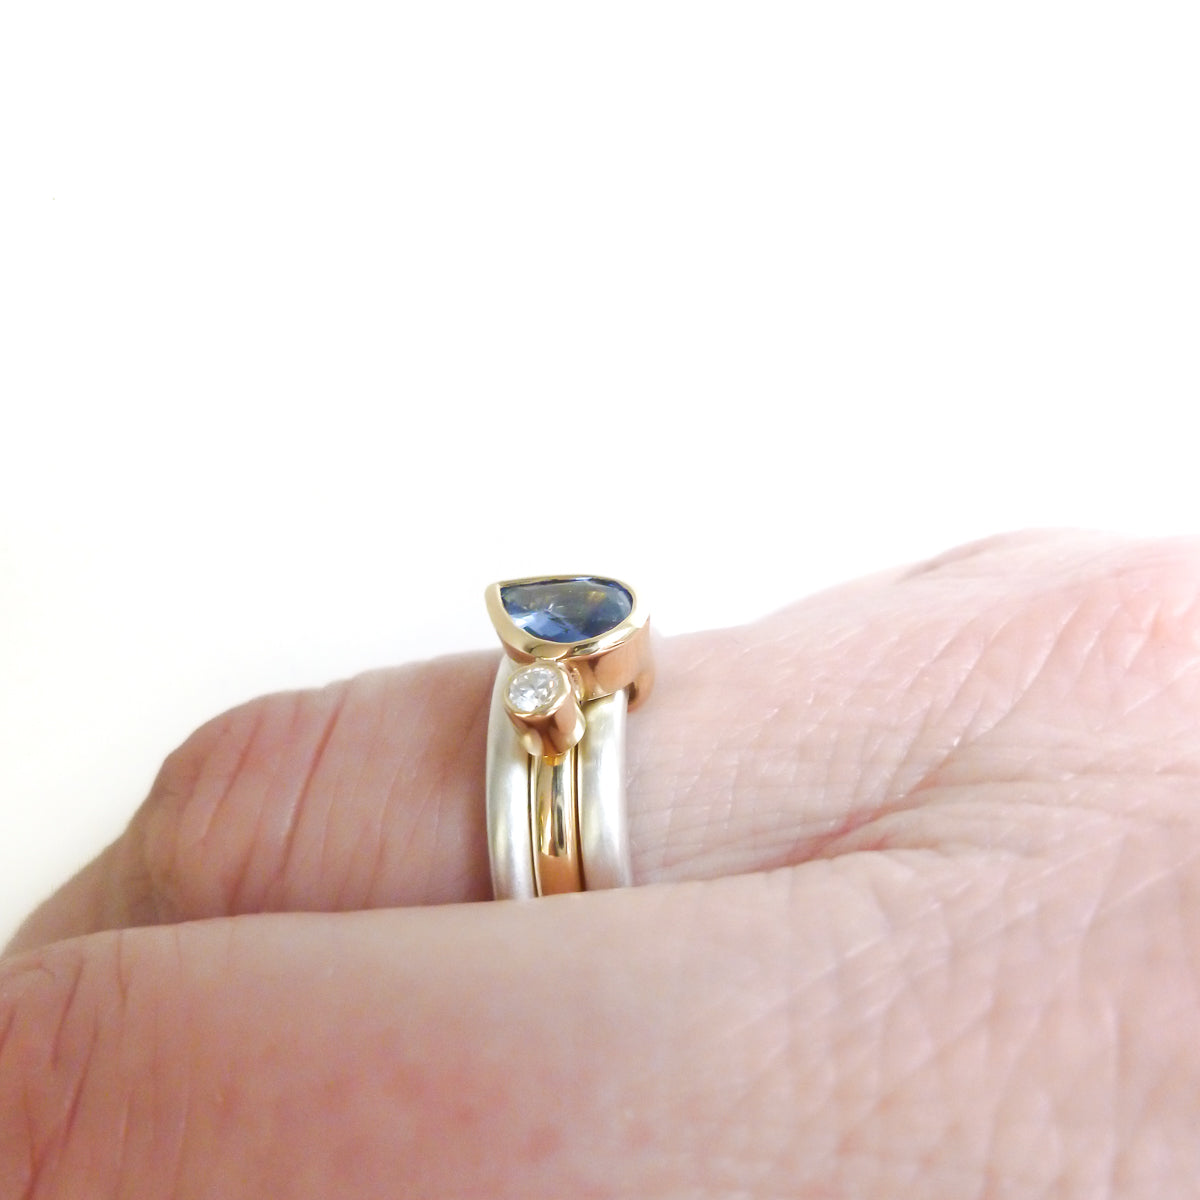 A contemporary bespoke unique aquamarine and diamond gold and silver ring by Sue Lane